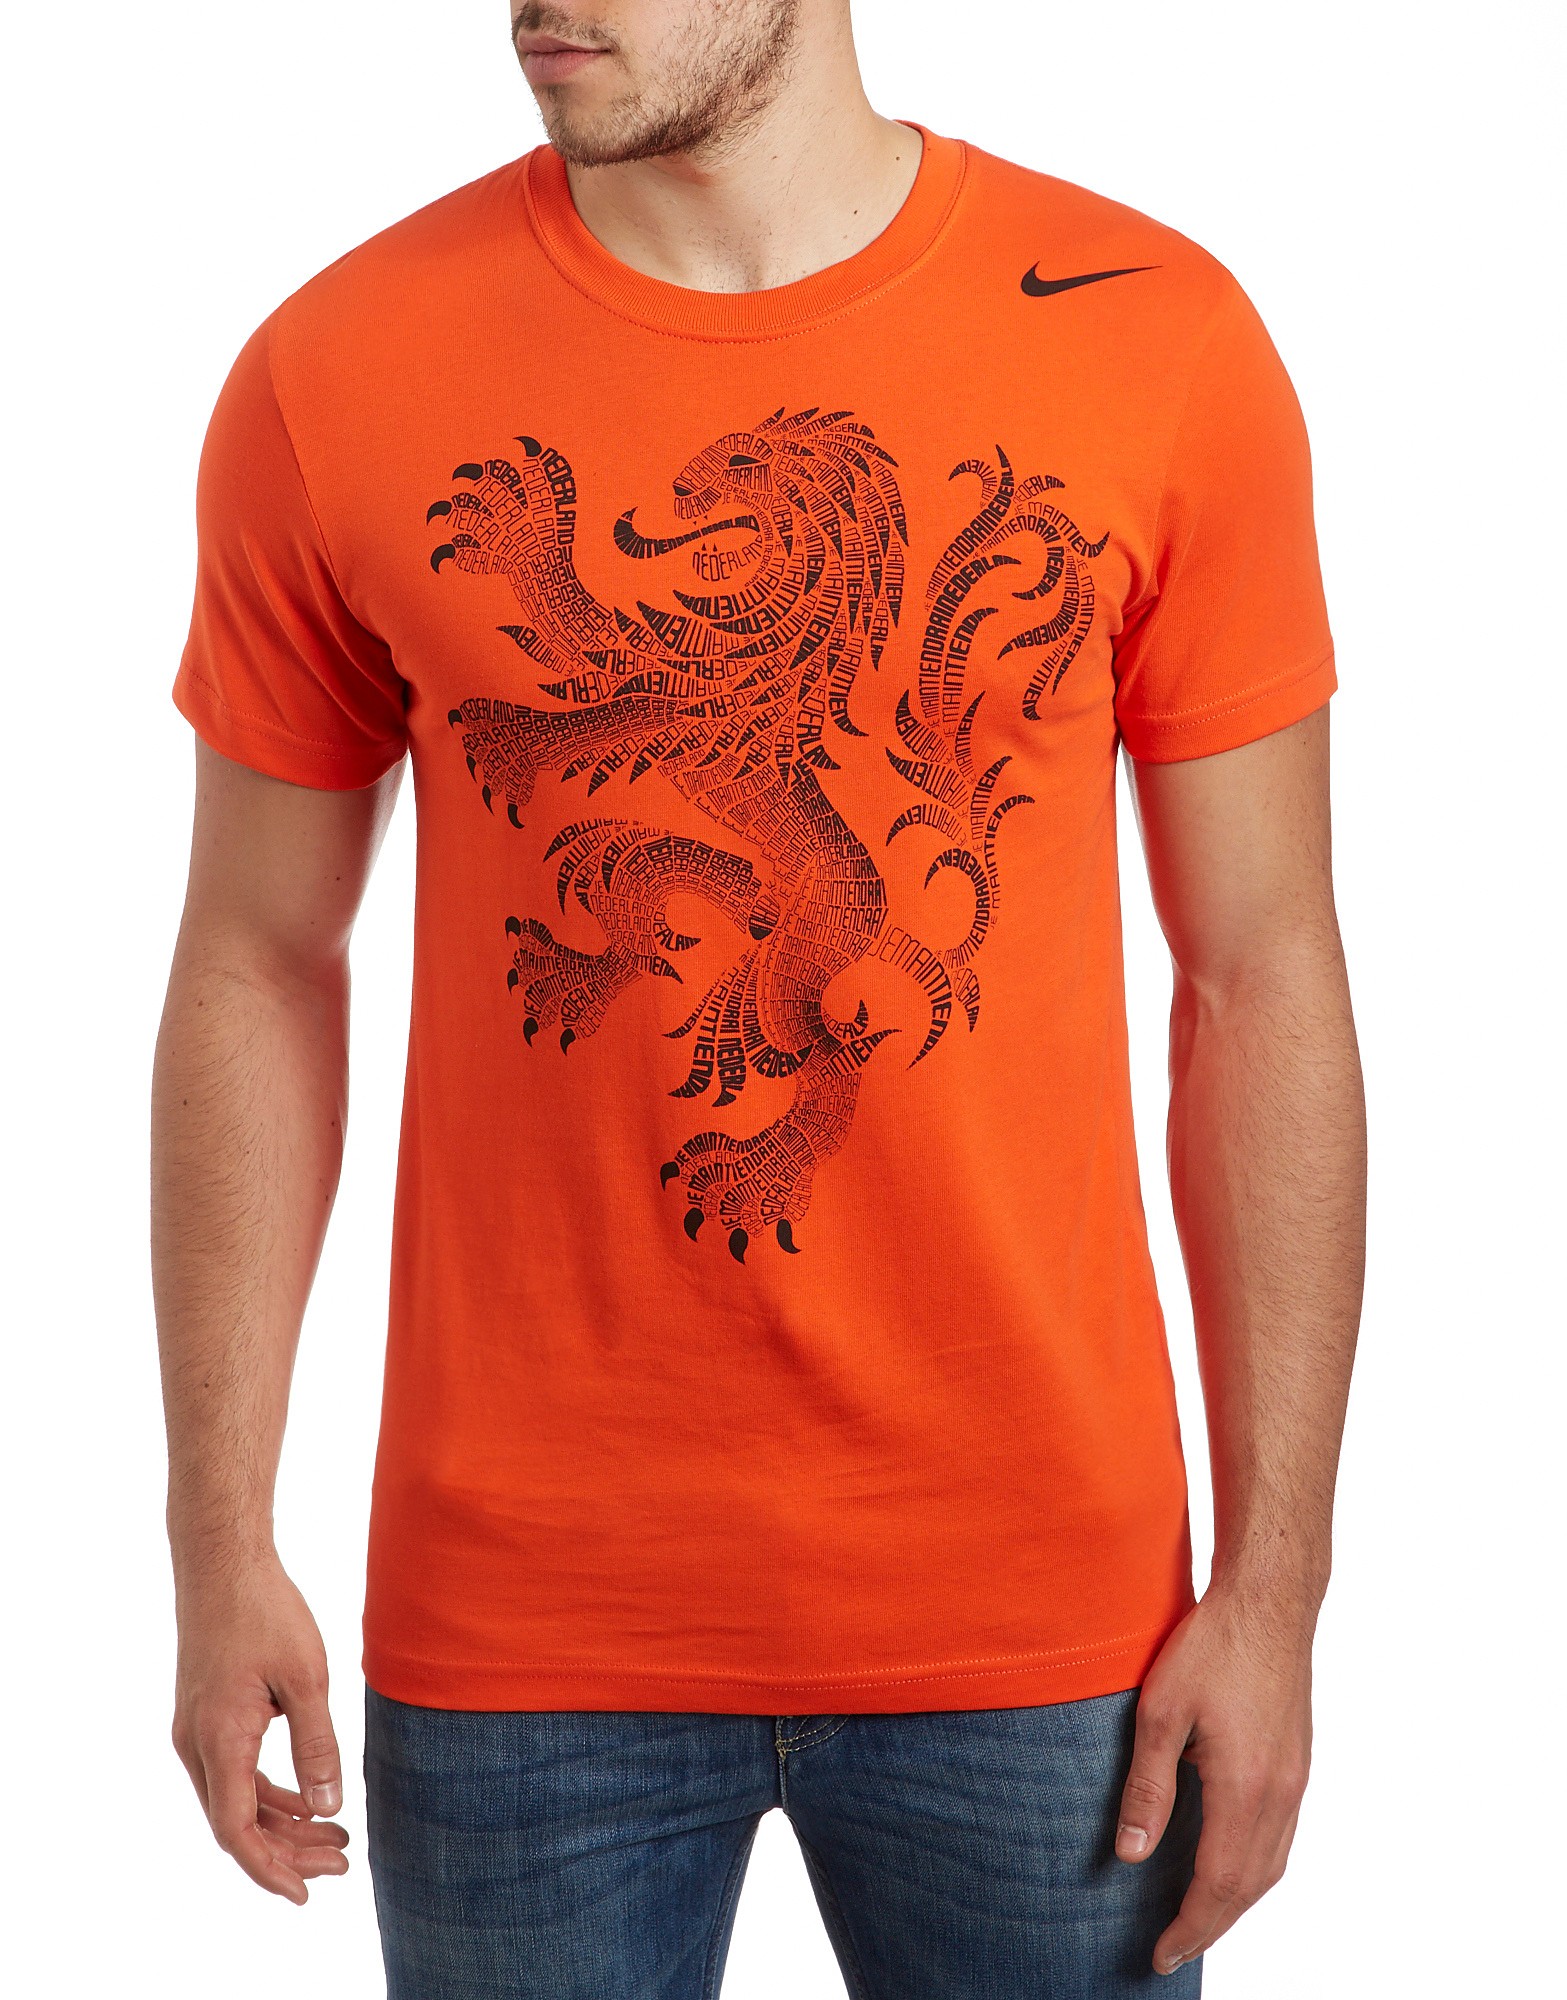 Nike Holland Graphic T-Shirt